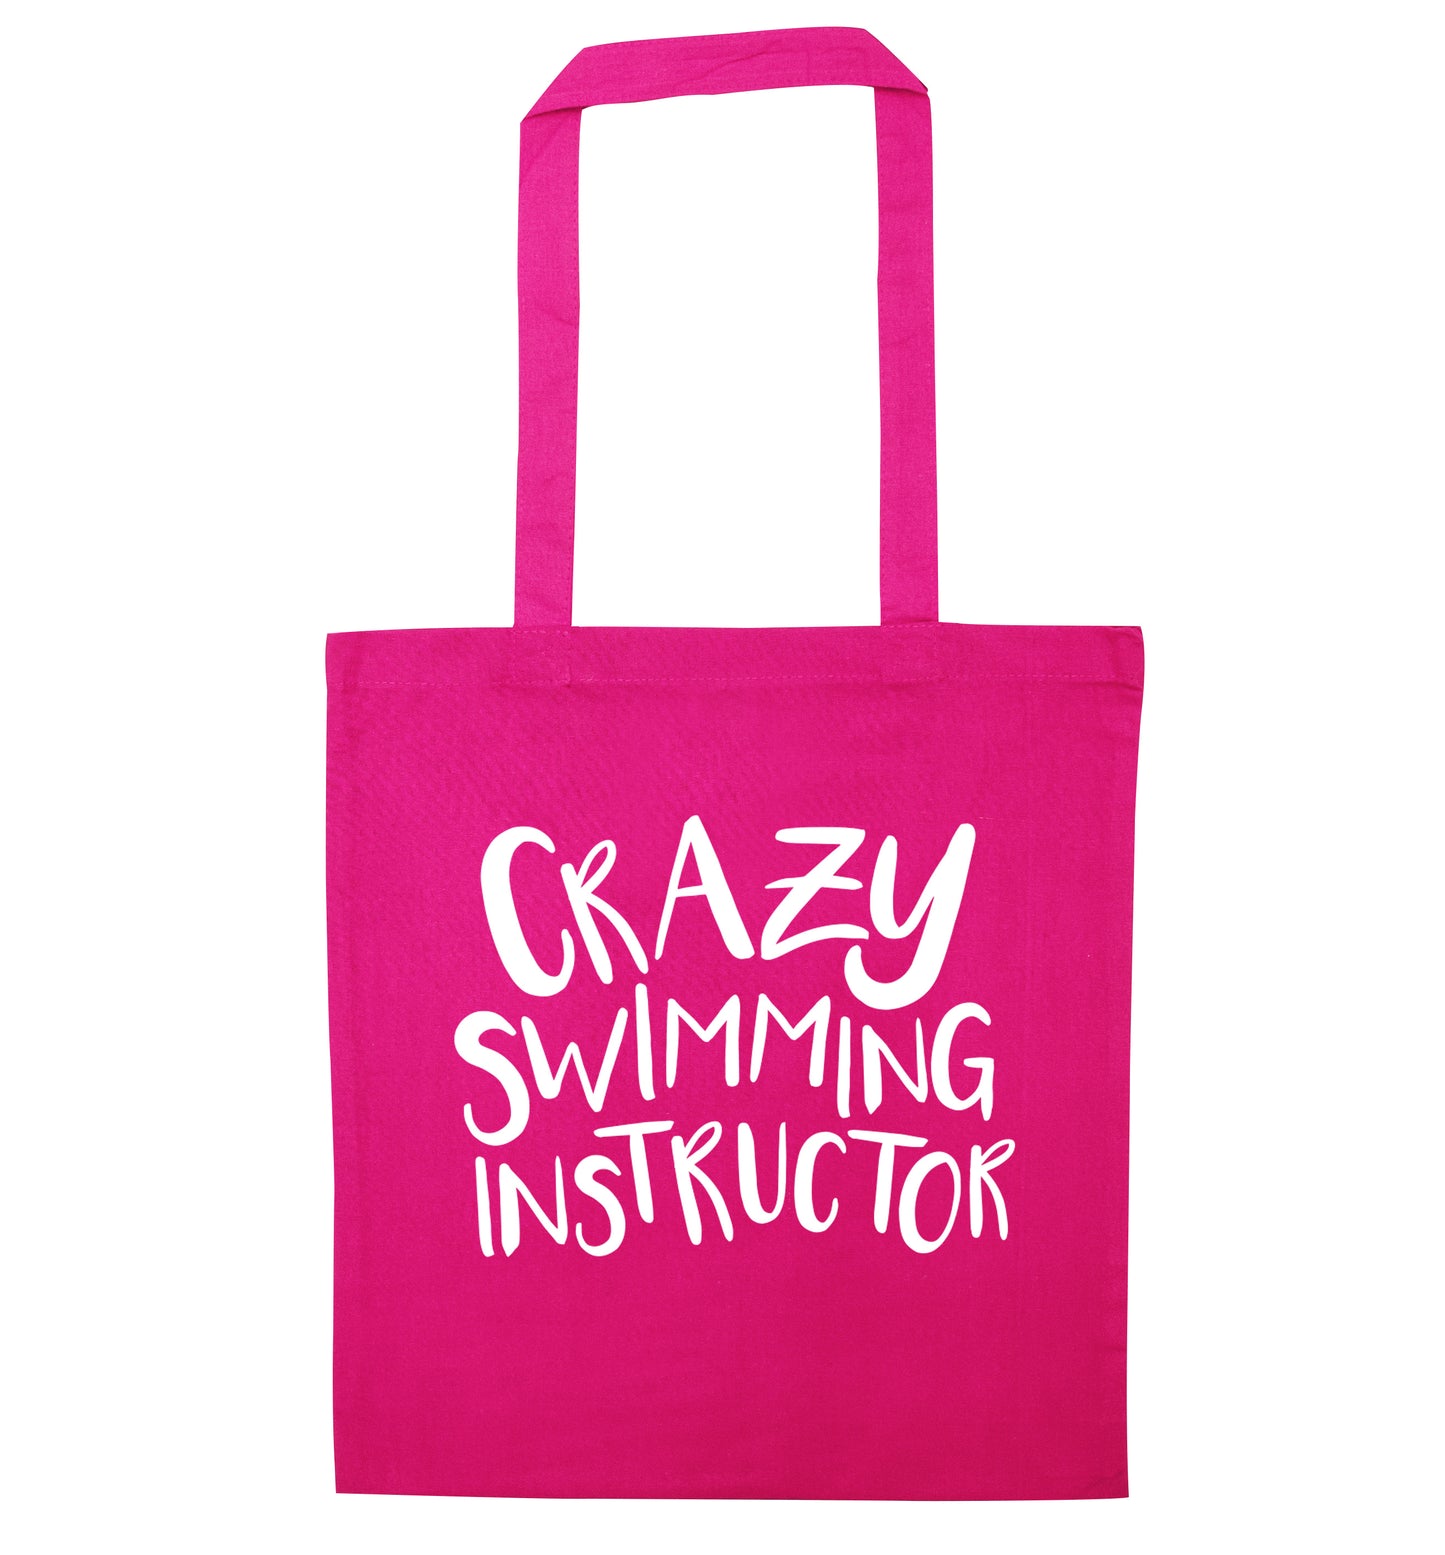 Crazy swimming instructor pink tote bag